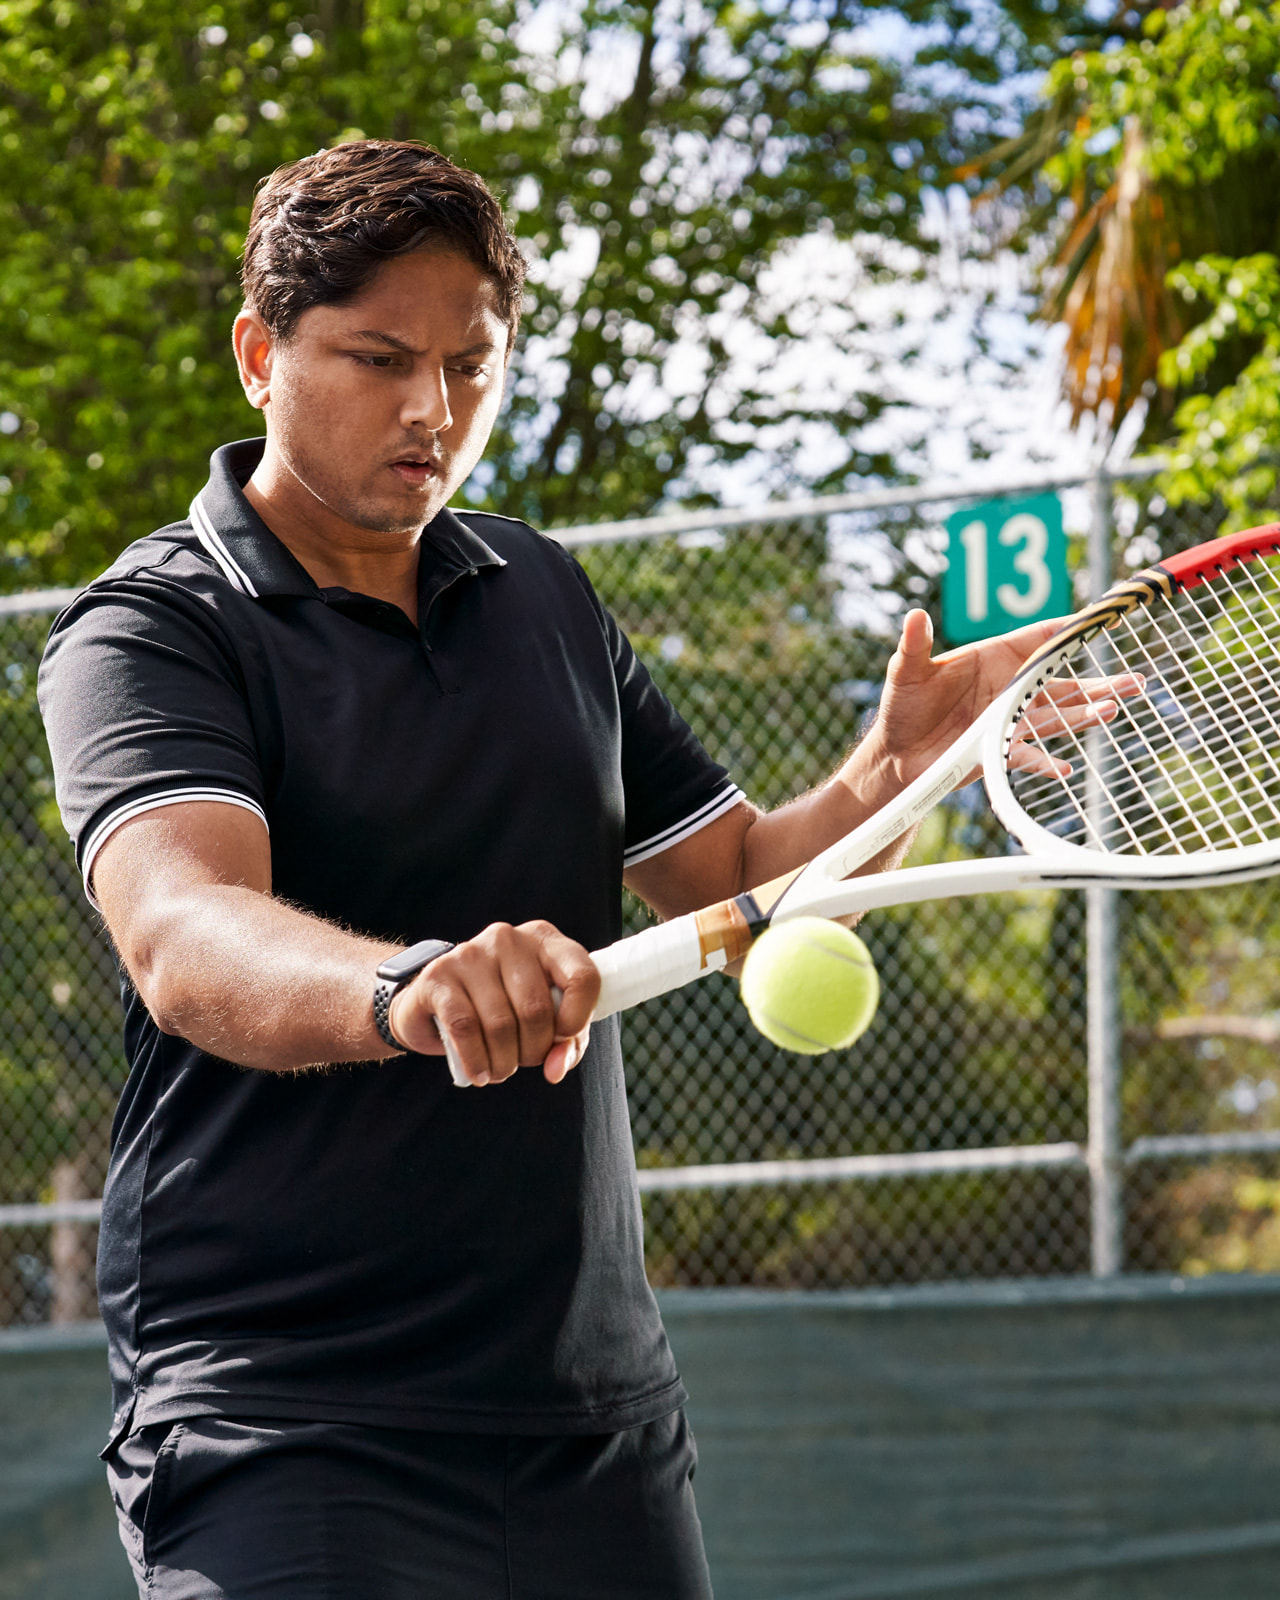 Swupnil Sahai and his co‑founder serve an ace with AI‑powered SwingVision